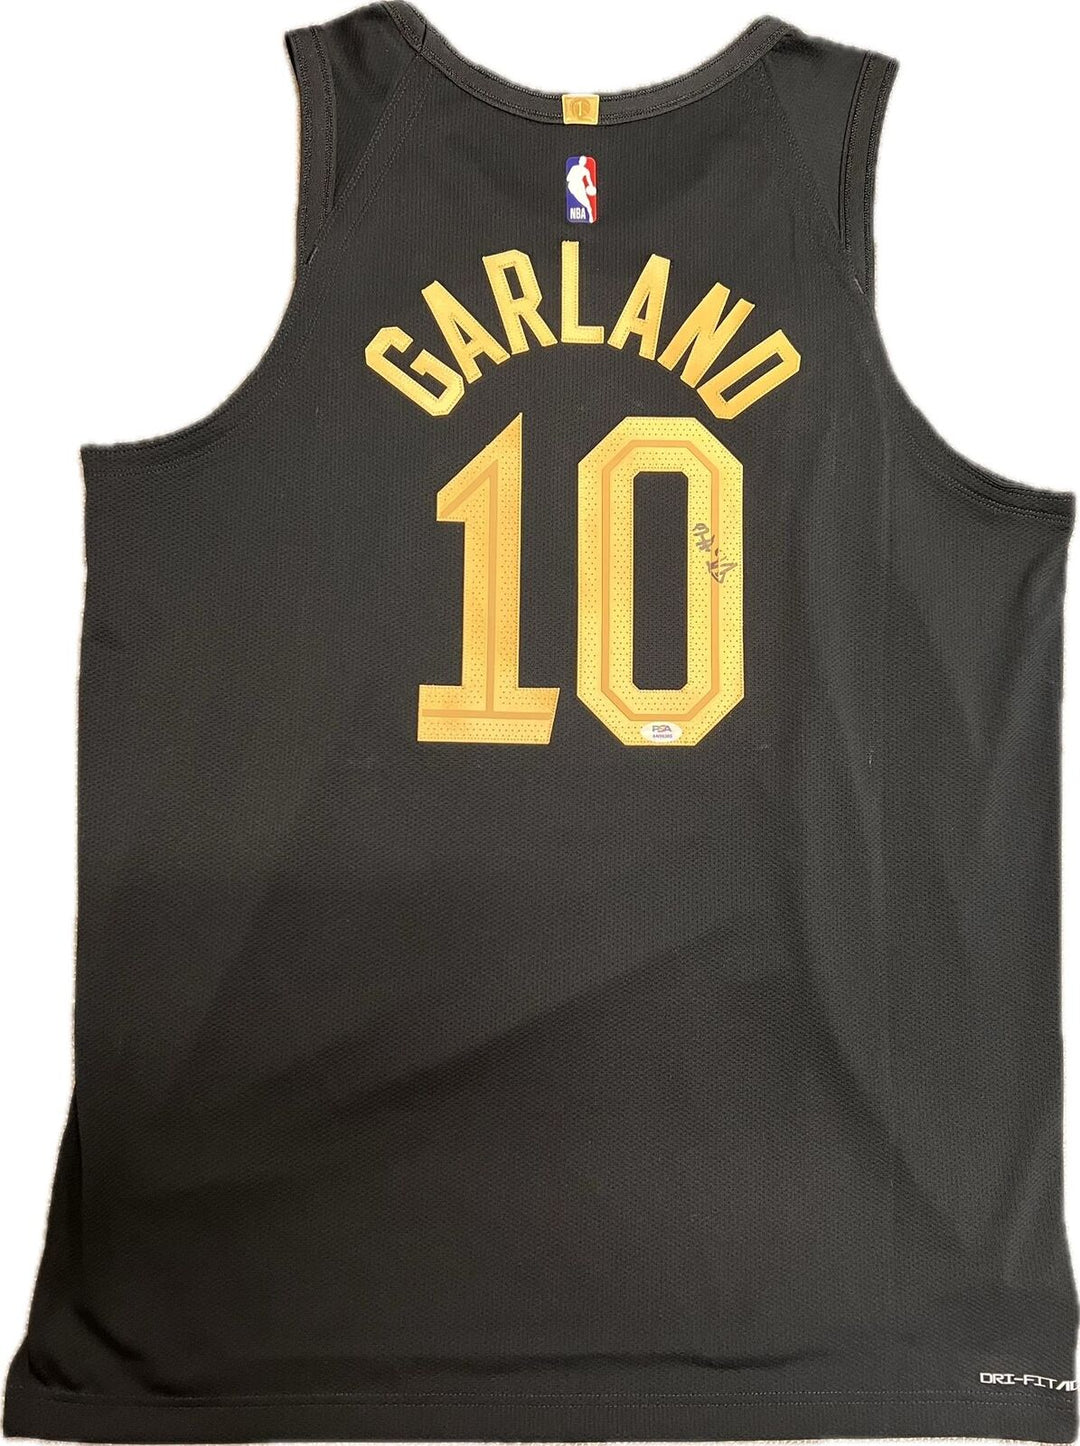 Darius Garland signed jersey PSA/DNA Cleveland Cavaliers Autographed Image 1